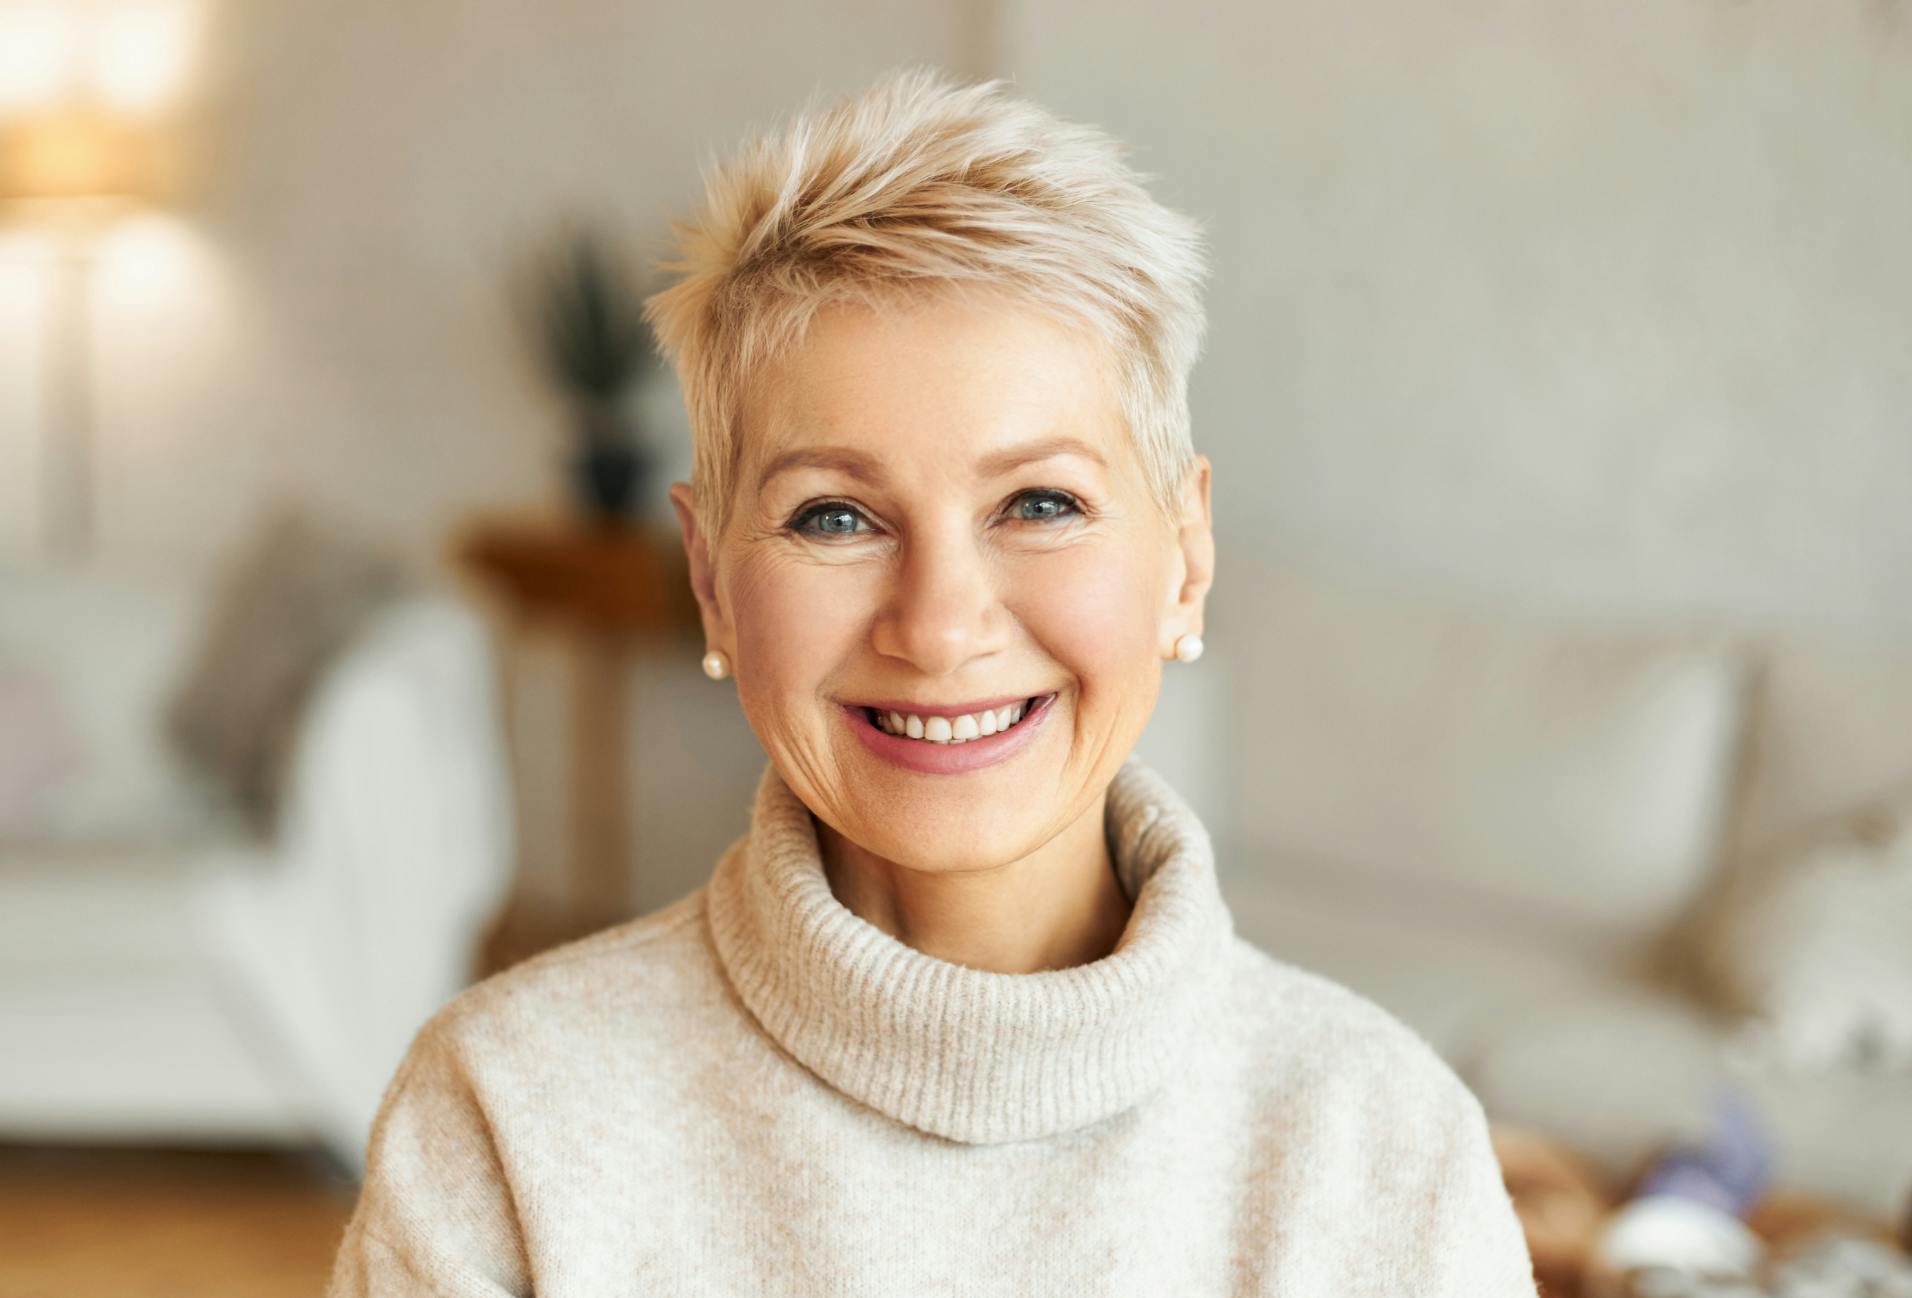 woman with short hair wearing a turtleneck